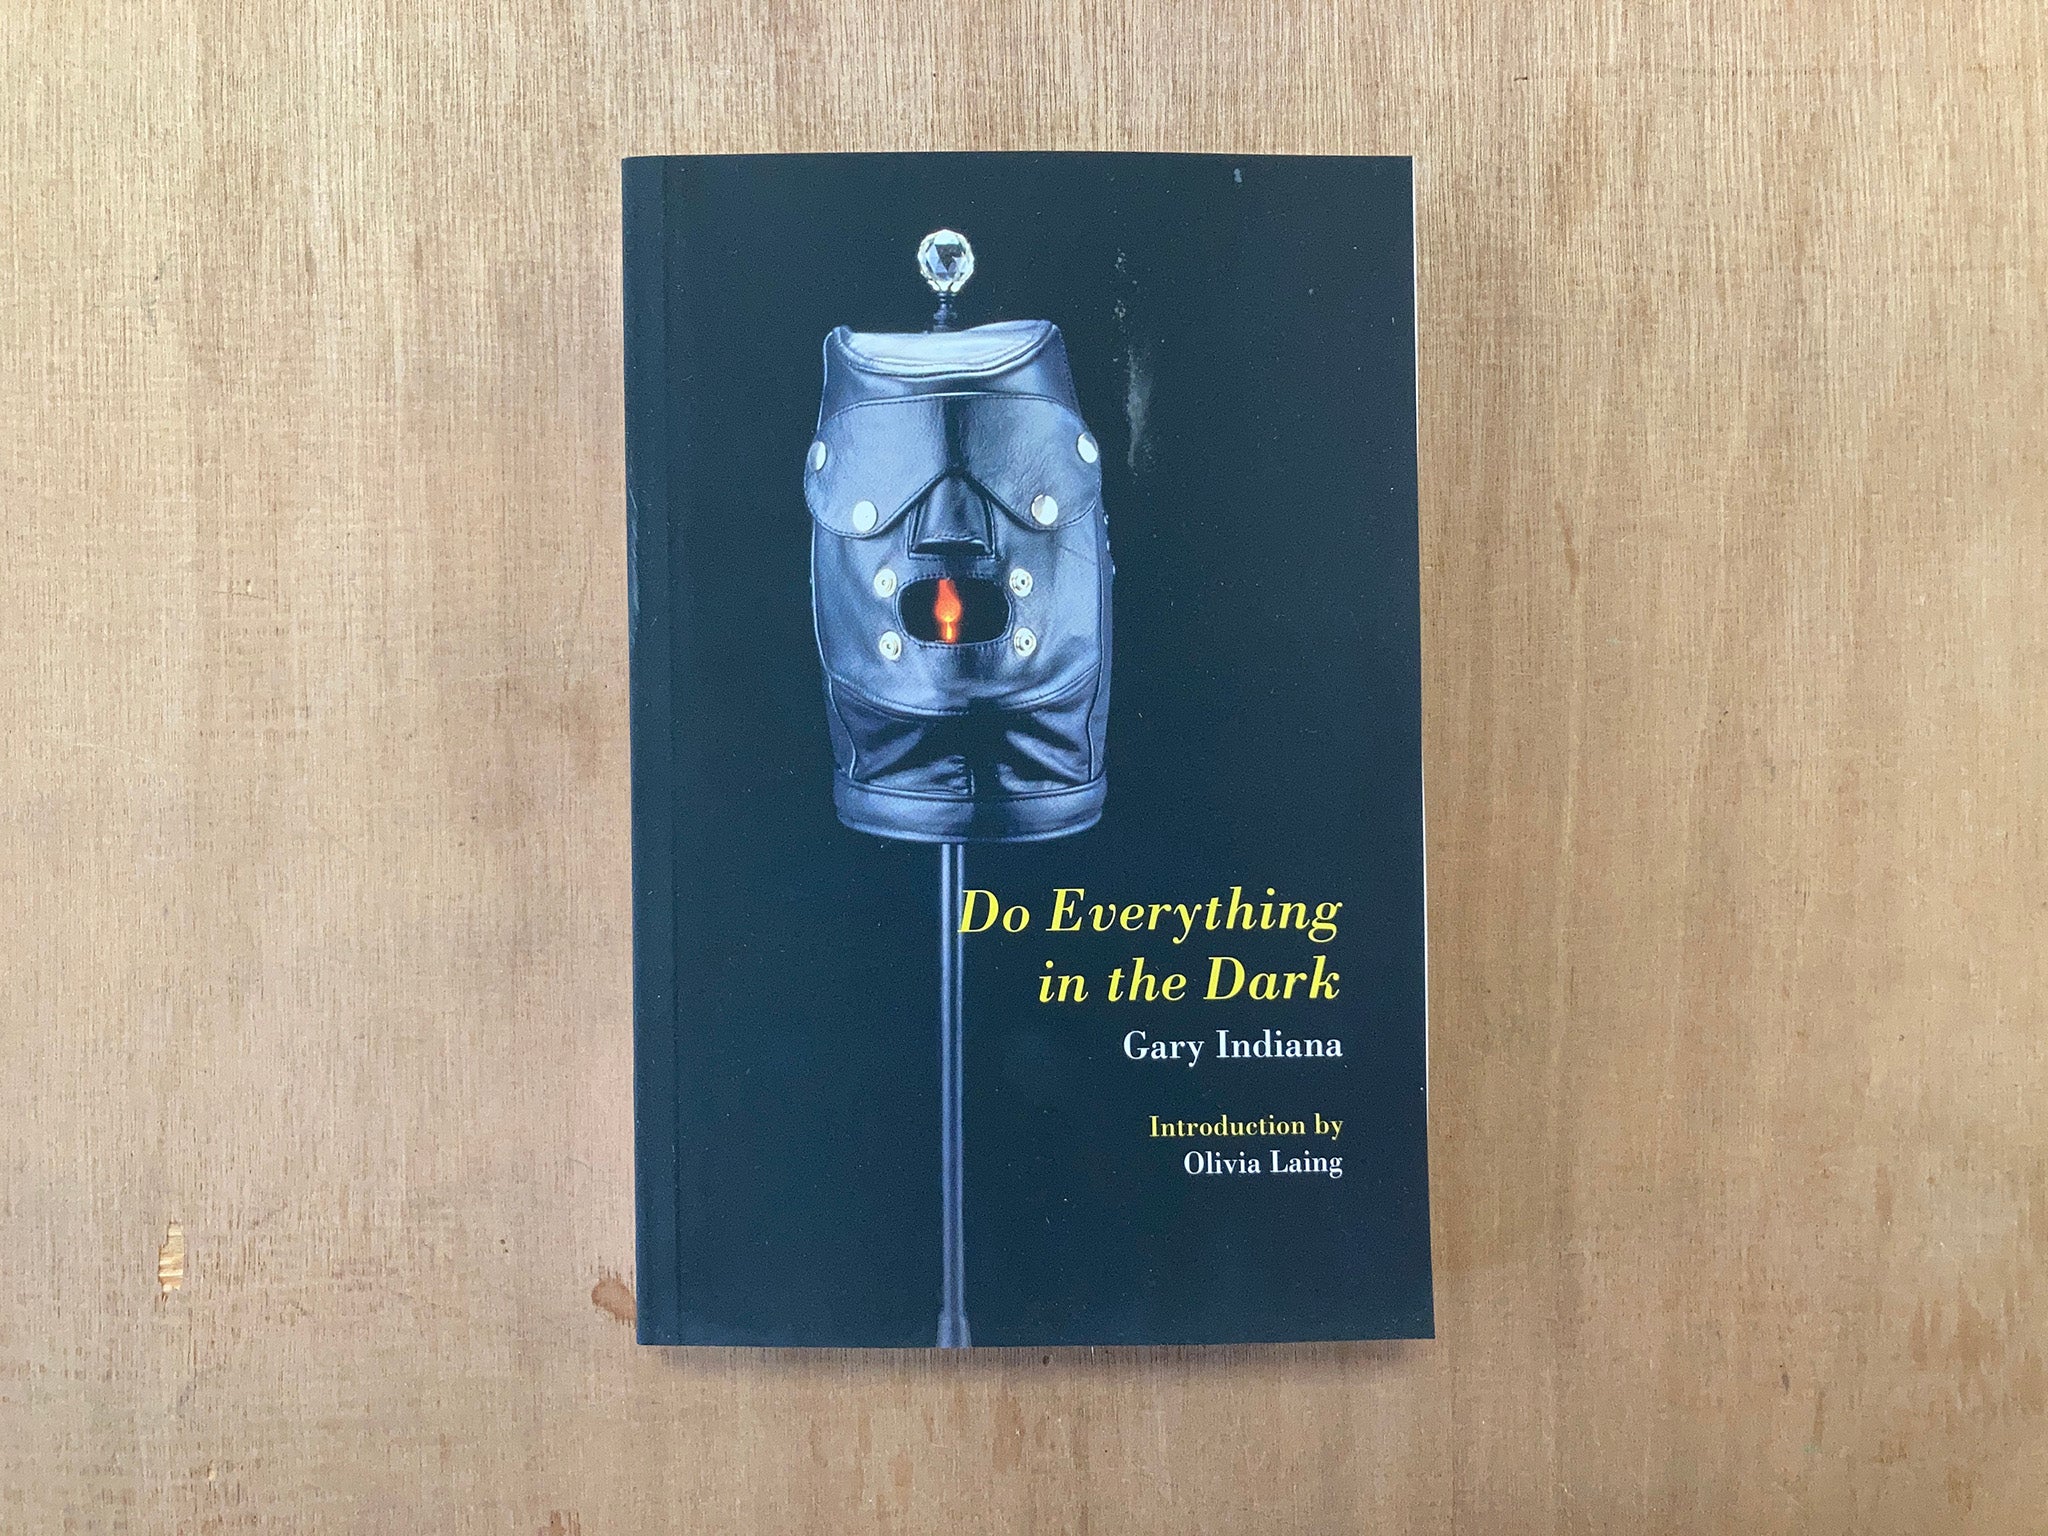 DO EVERYTHING IN THE DARK by Gary Indiana